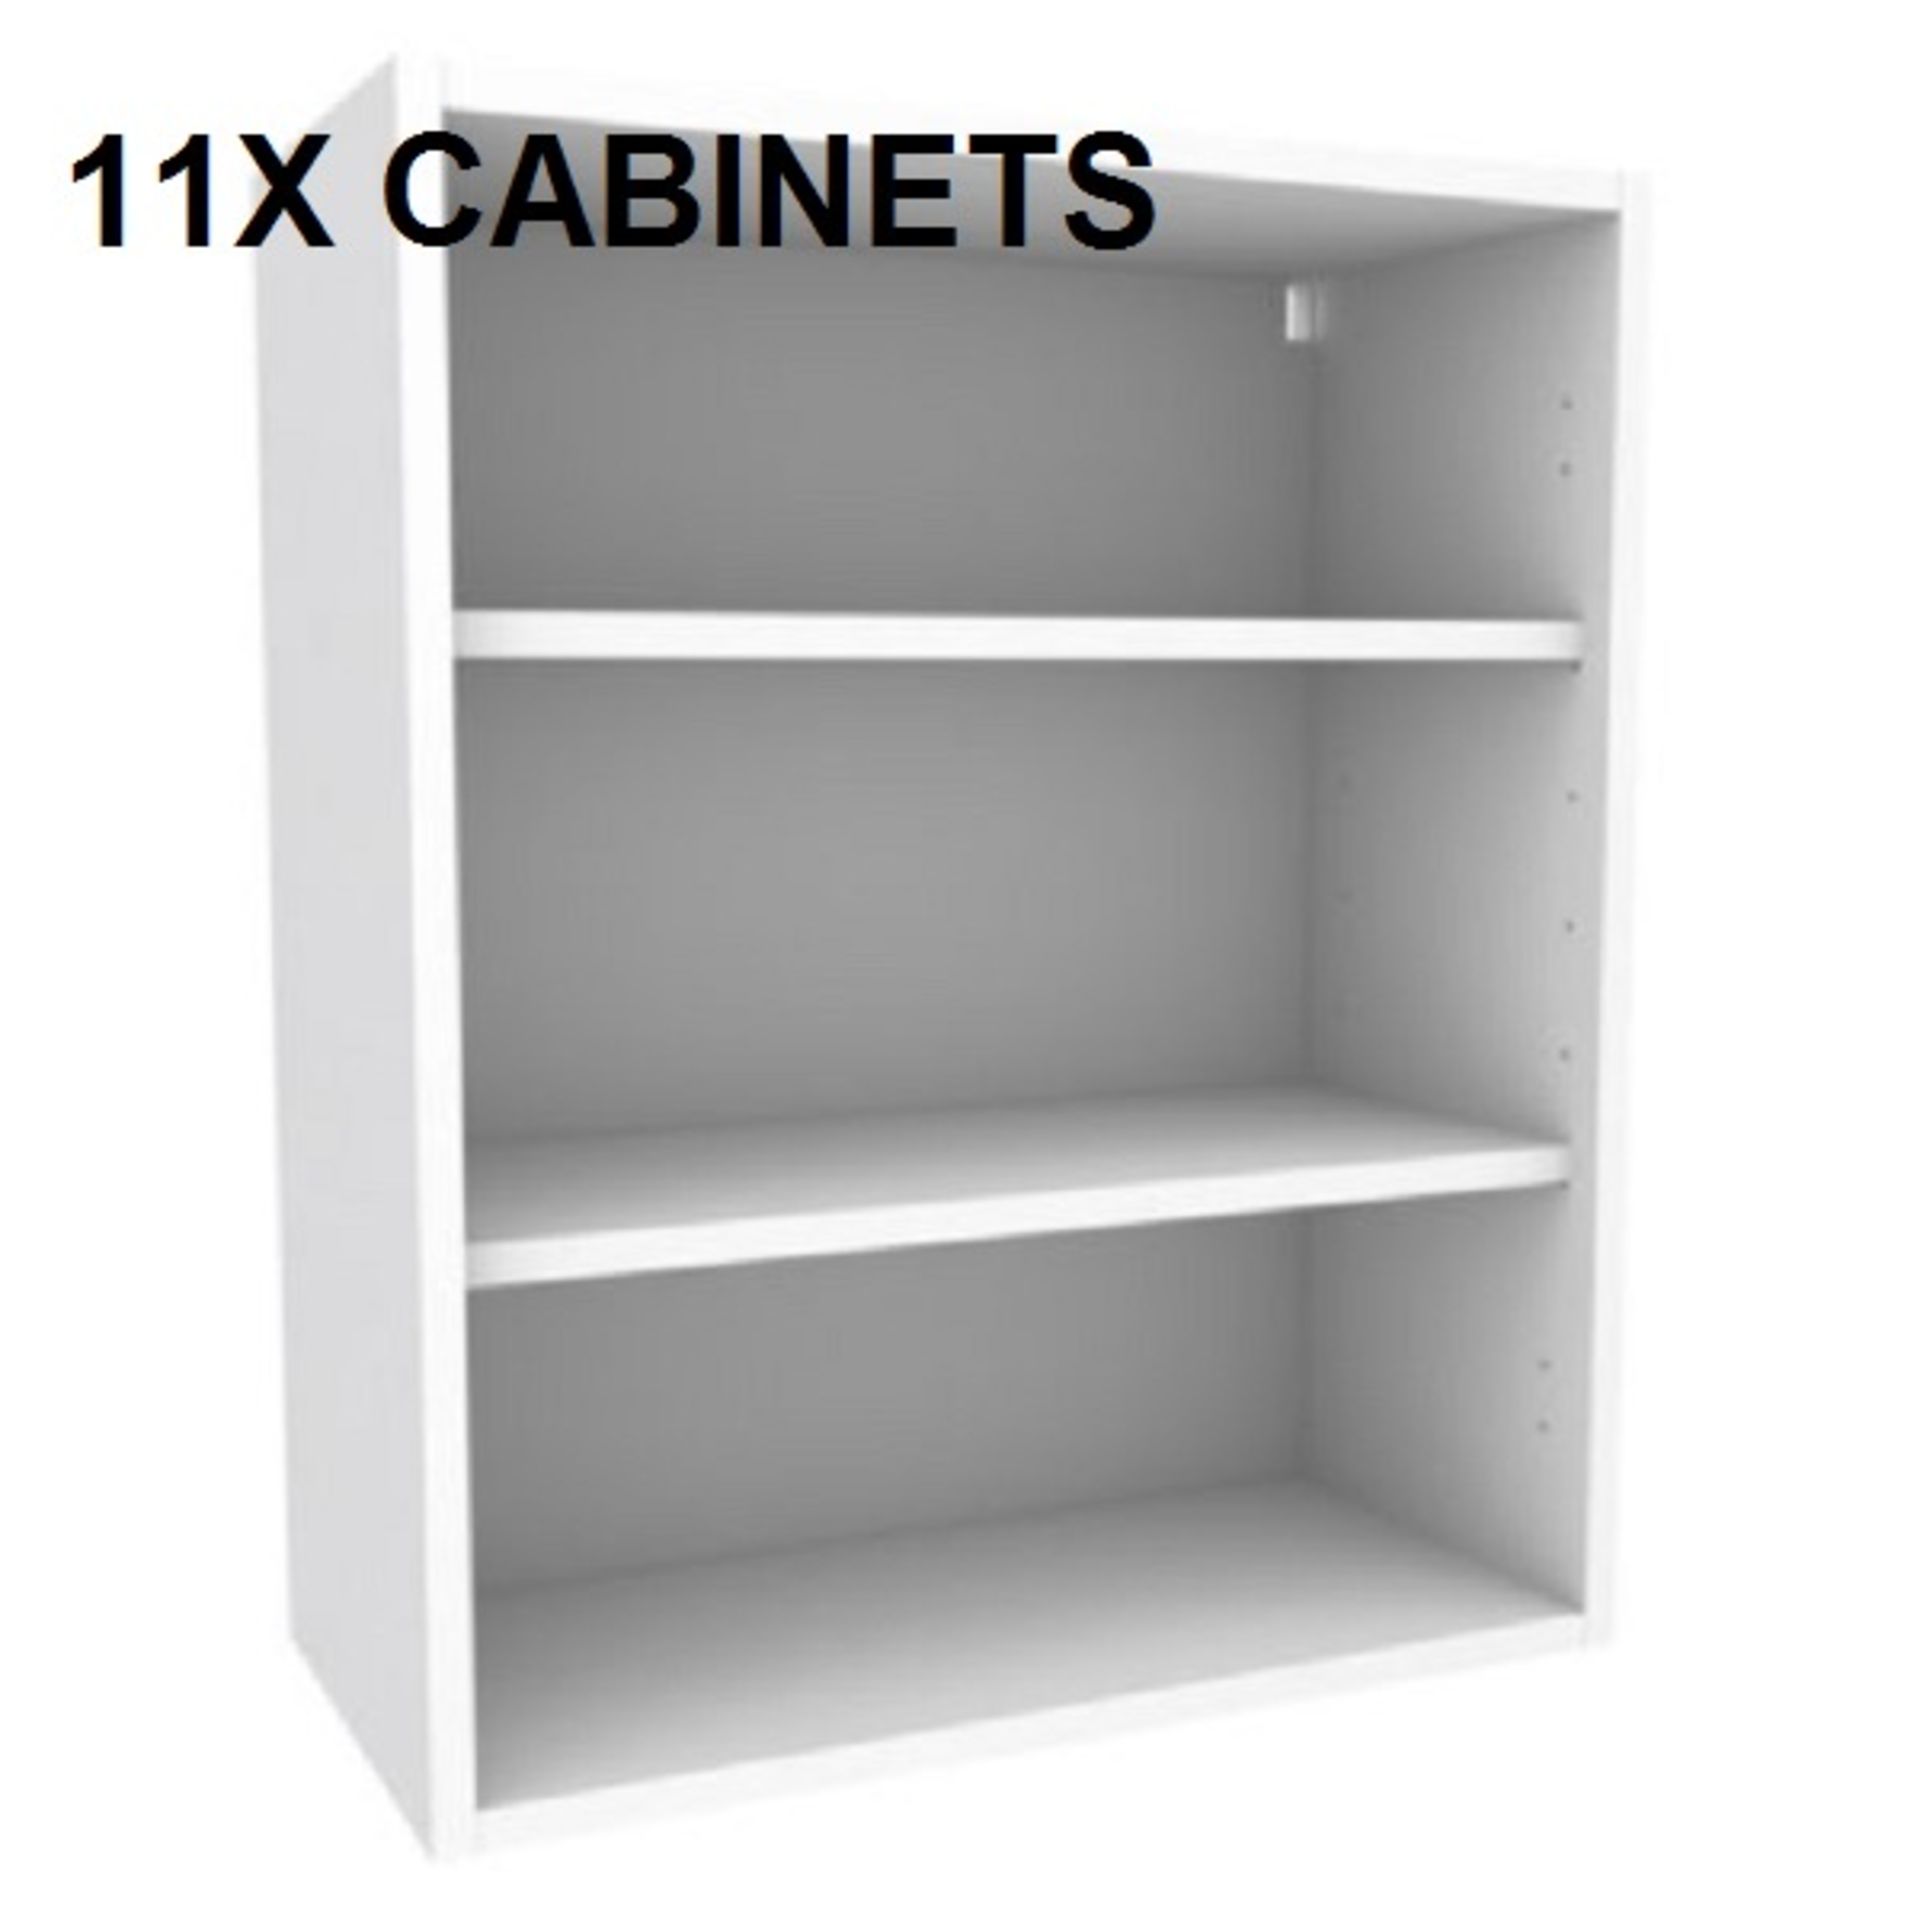 10X B&Q Cooke & Lewis White 300Mm X 720Mm Standard Height Wall Cabinets X10 Ten Brand New & Boxed.